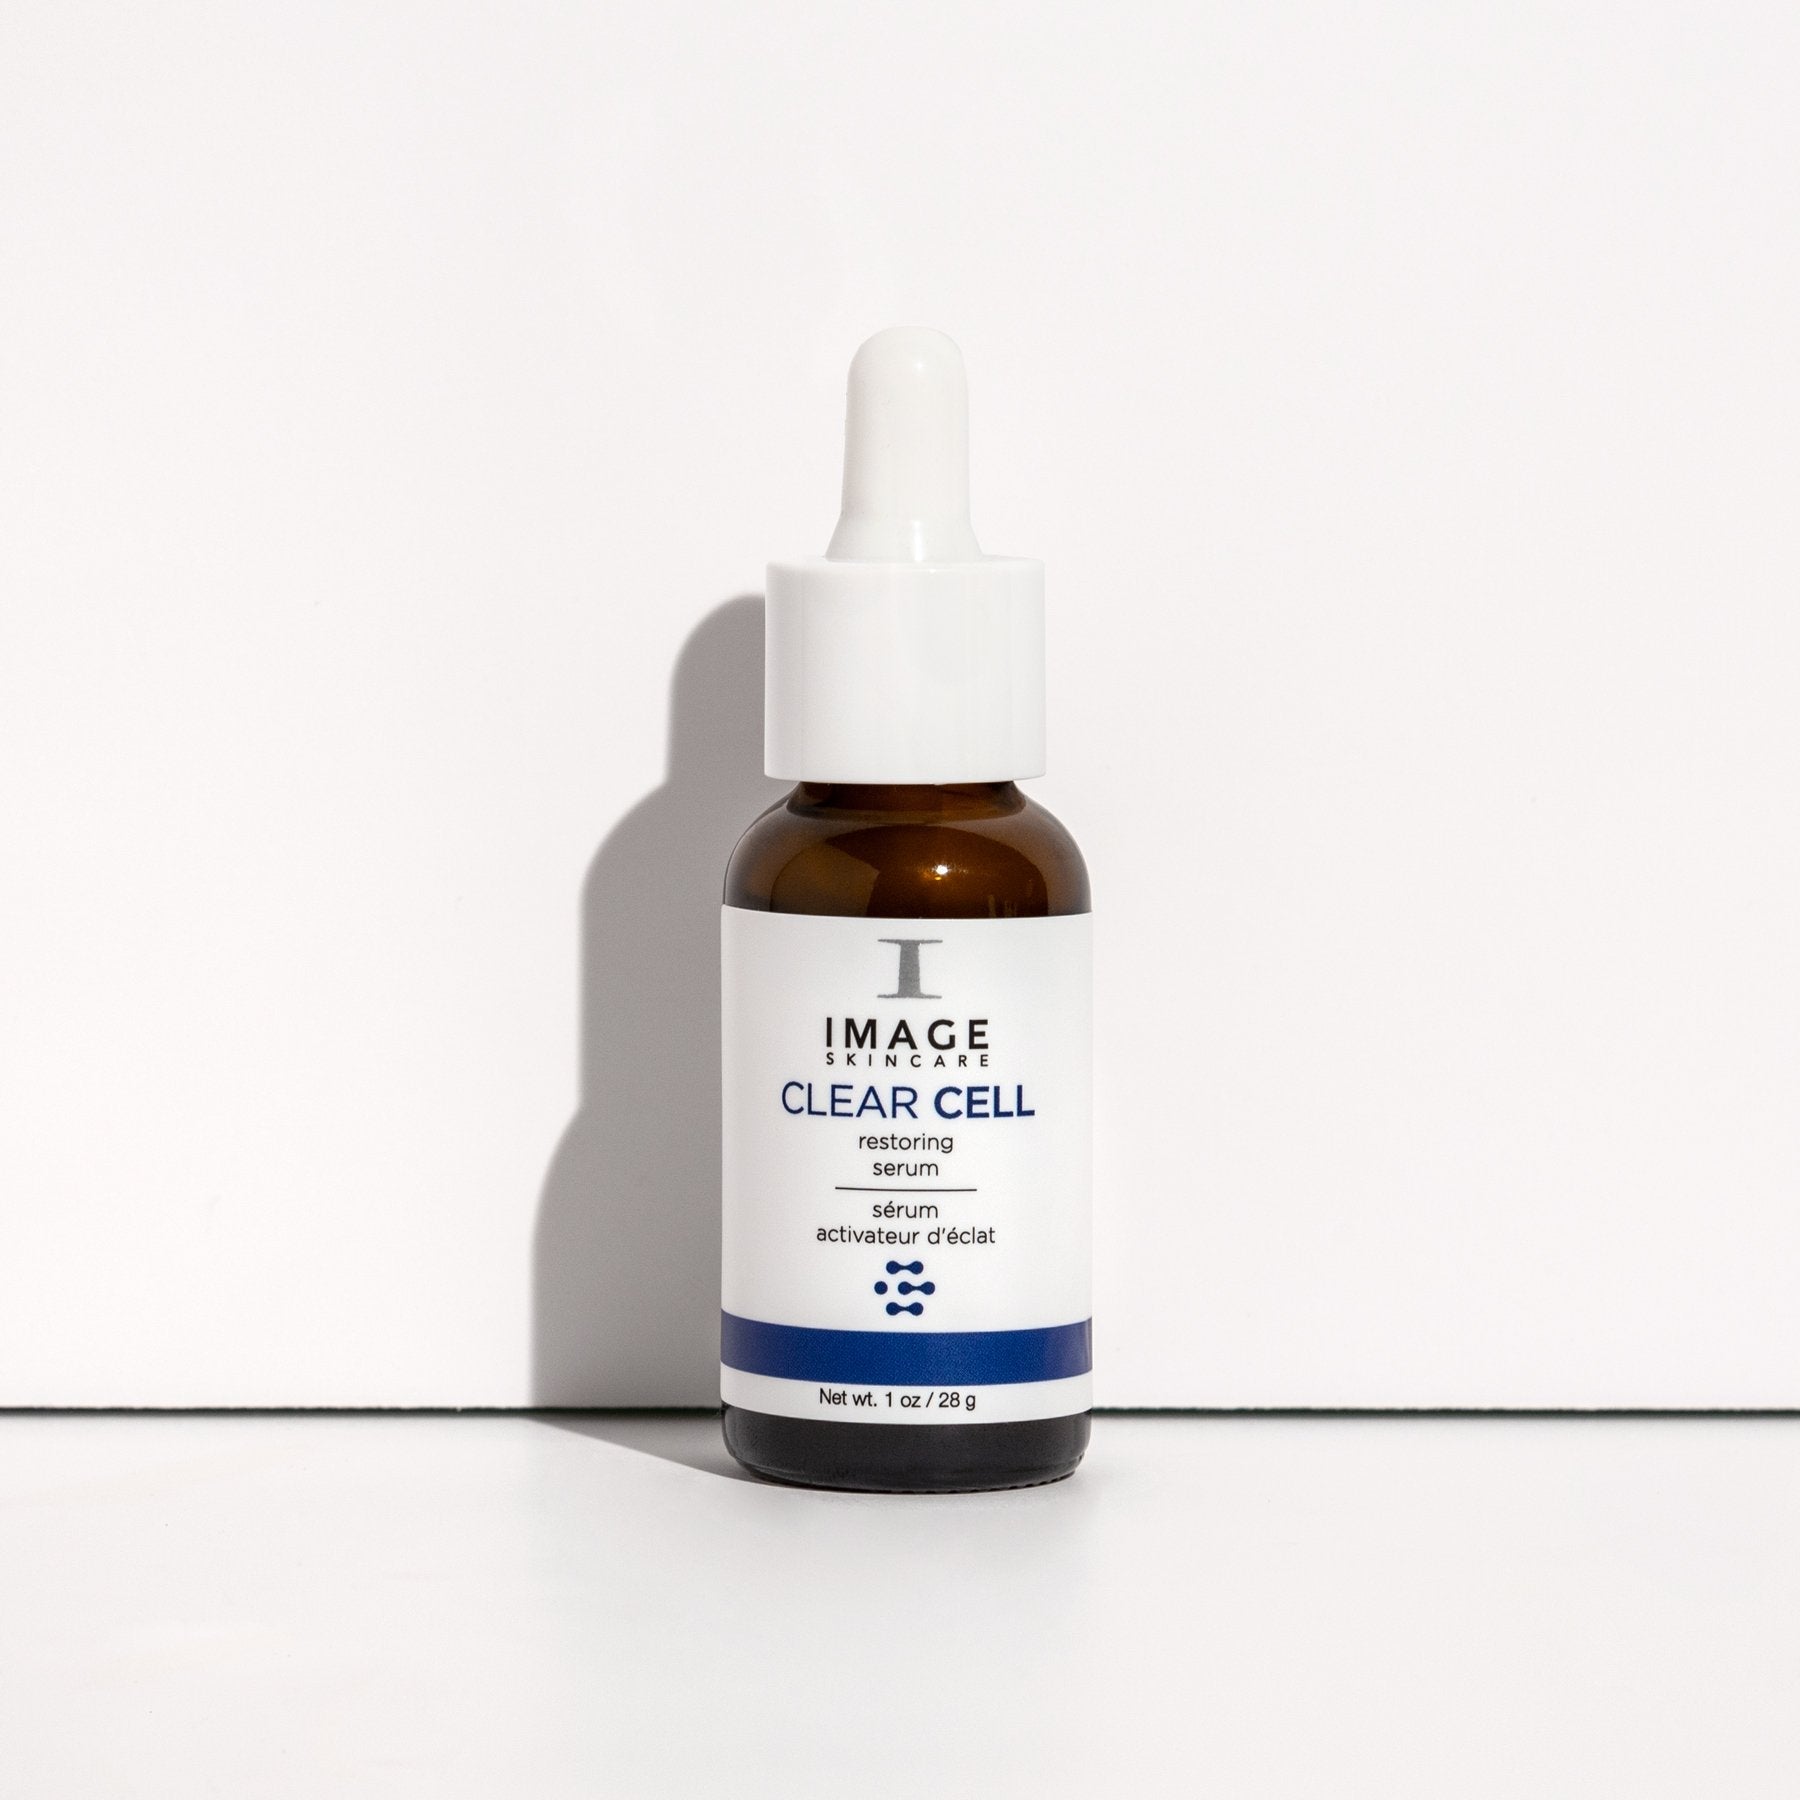 CLEAR CELL Restoring Serum | IMAGE Skincare